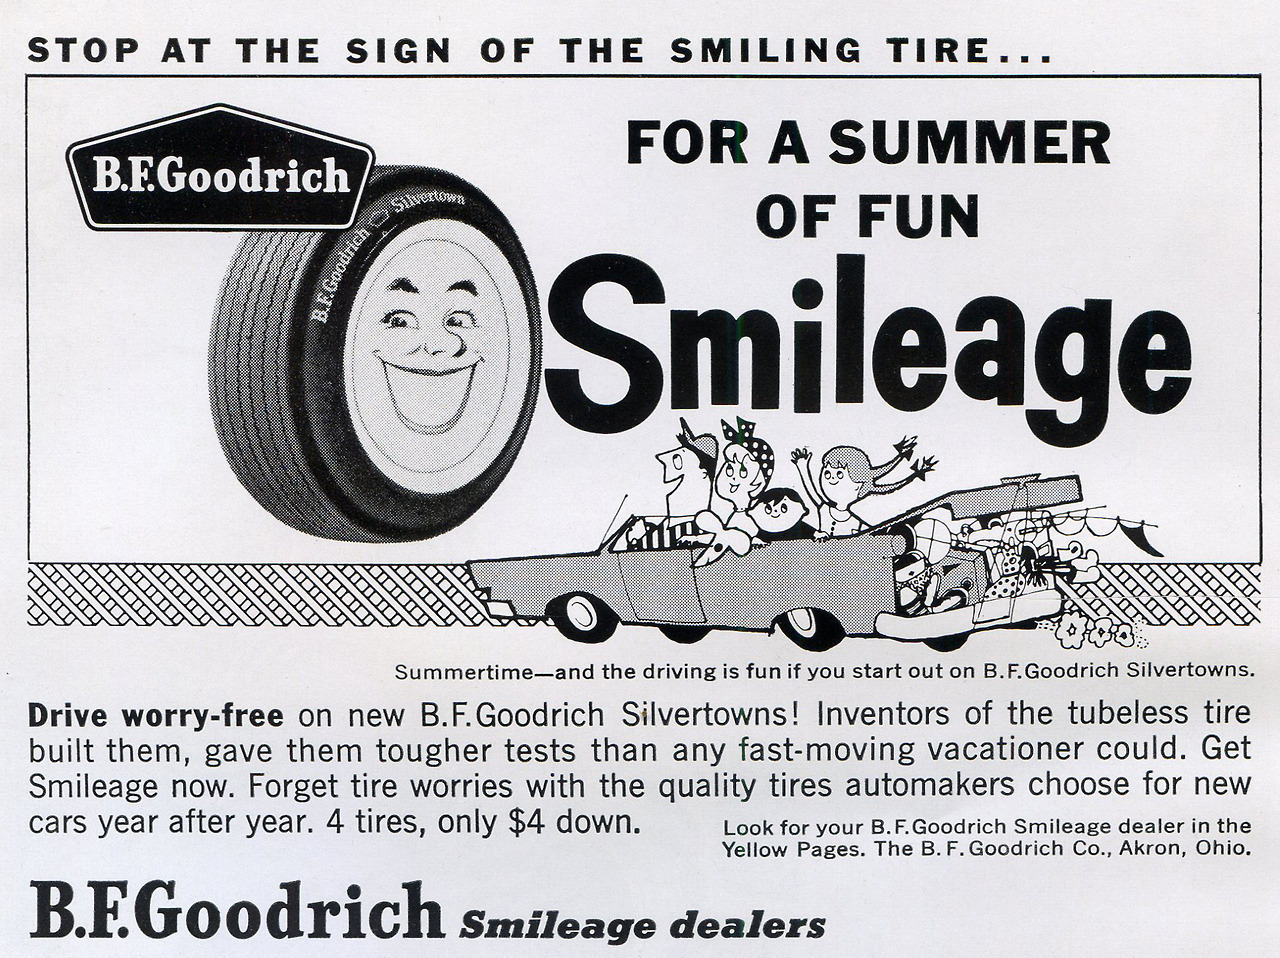 B.F. Goodrich Silvertown tires - published in National Geographic - July 1959